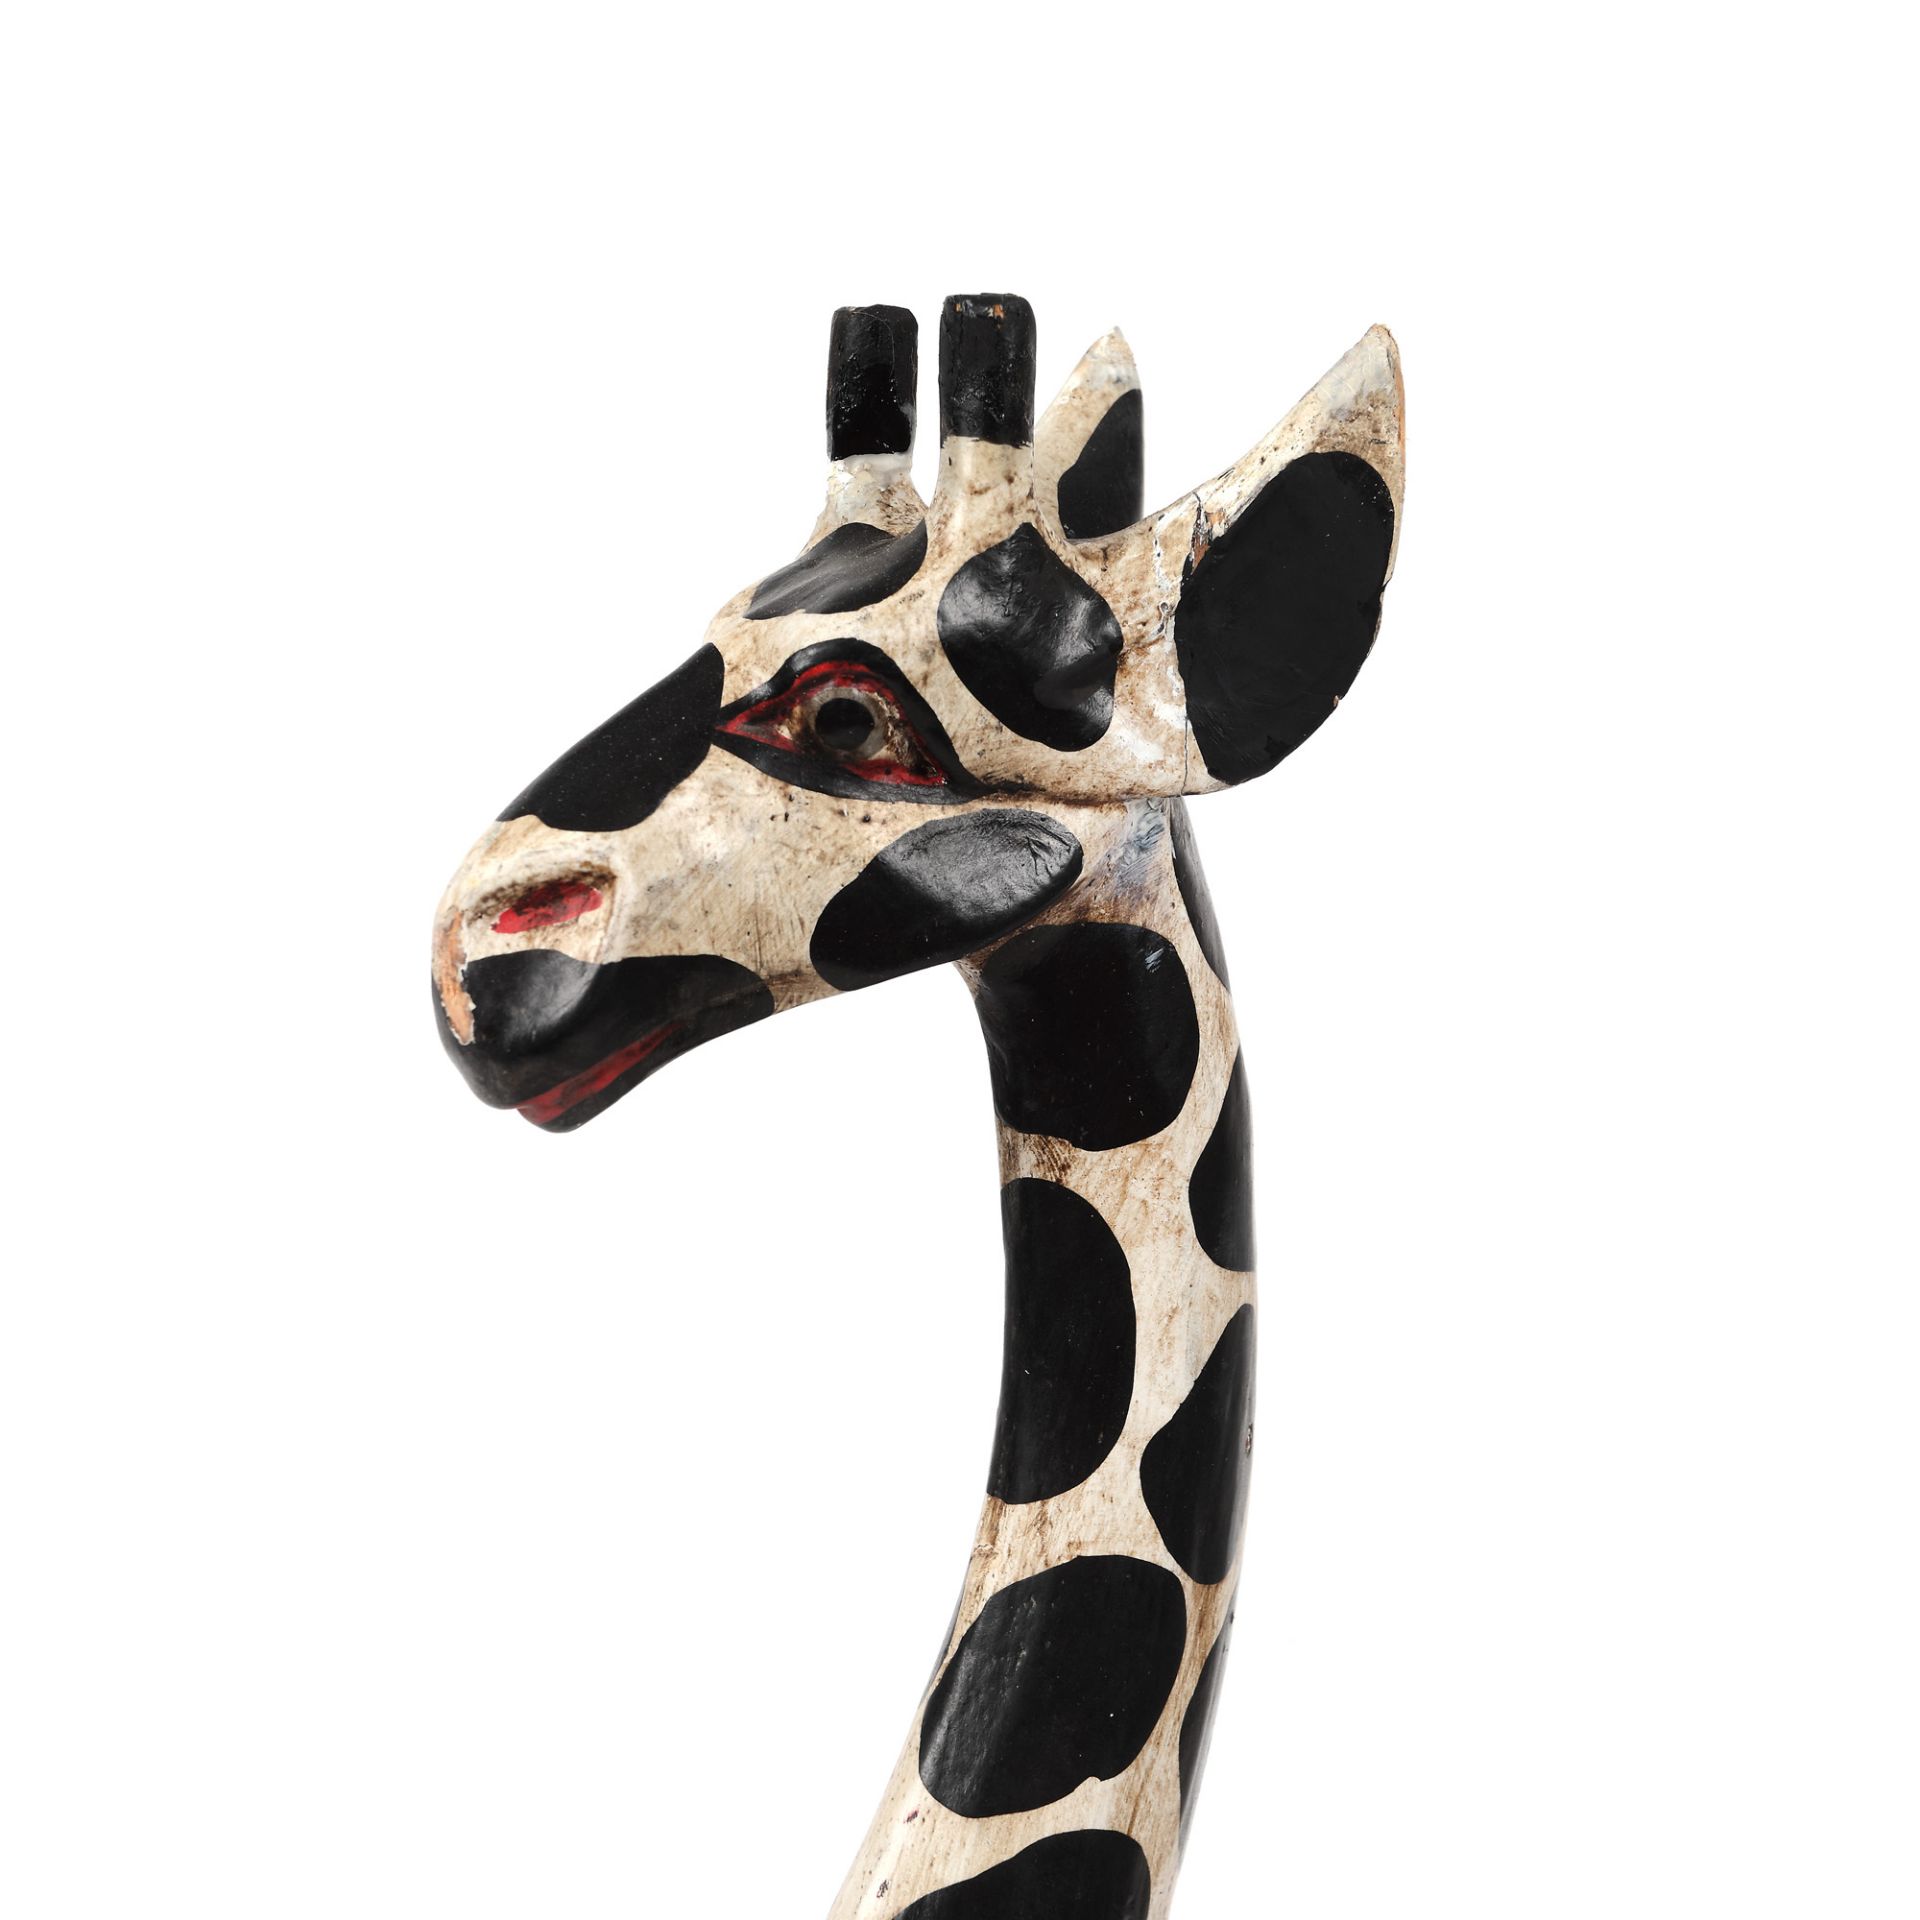 Pair of Art Deco giraffes made of teak wood, France, approx. 1930 - Image 4 of 4